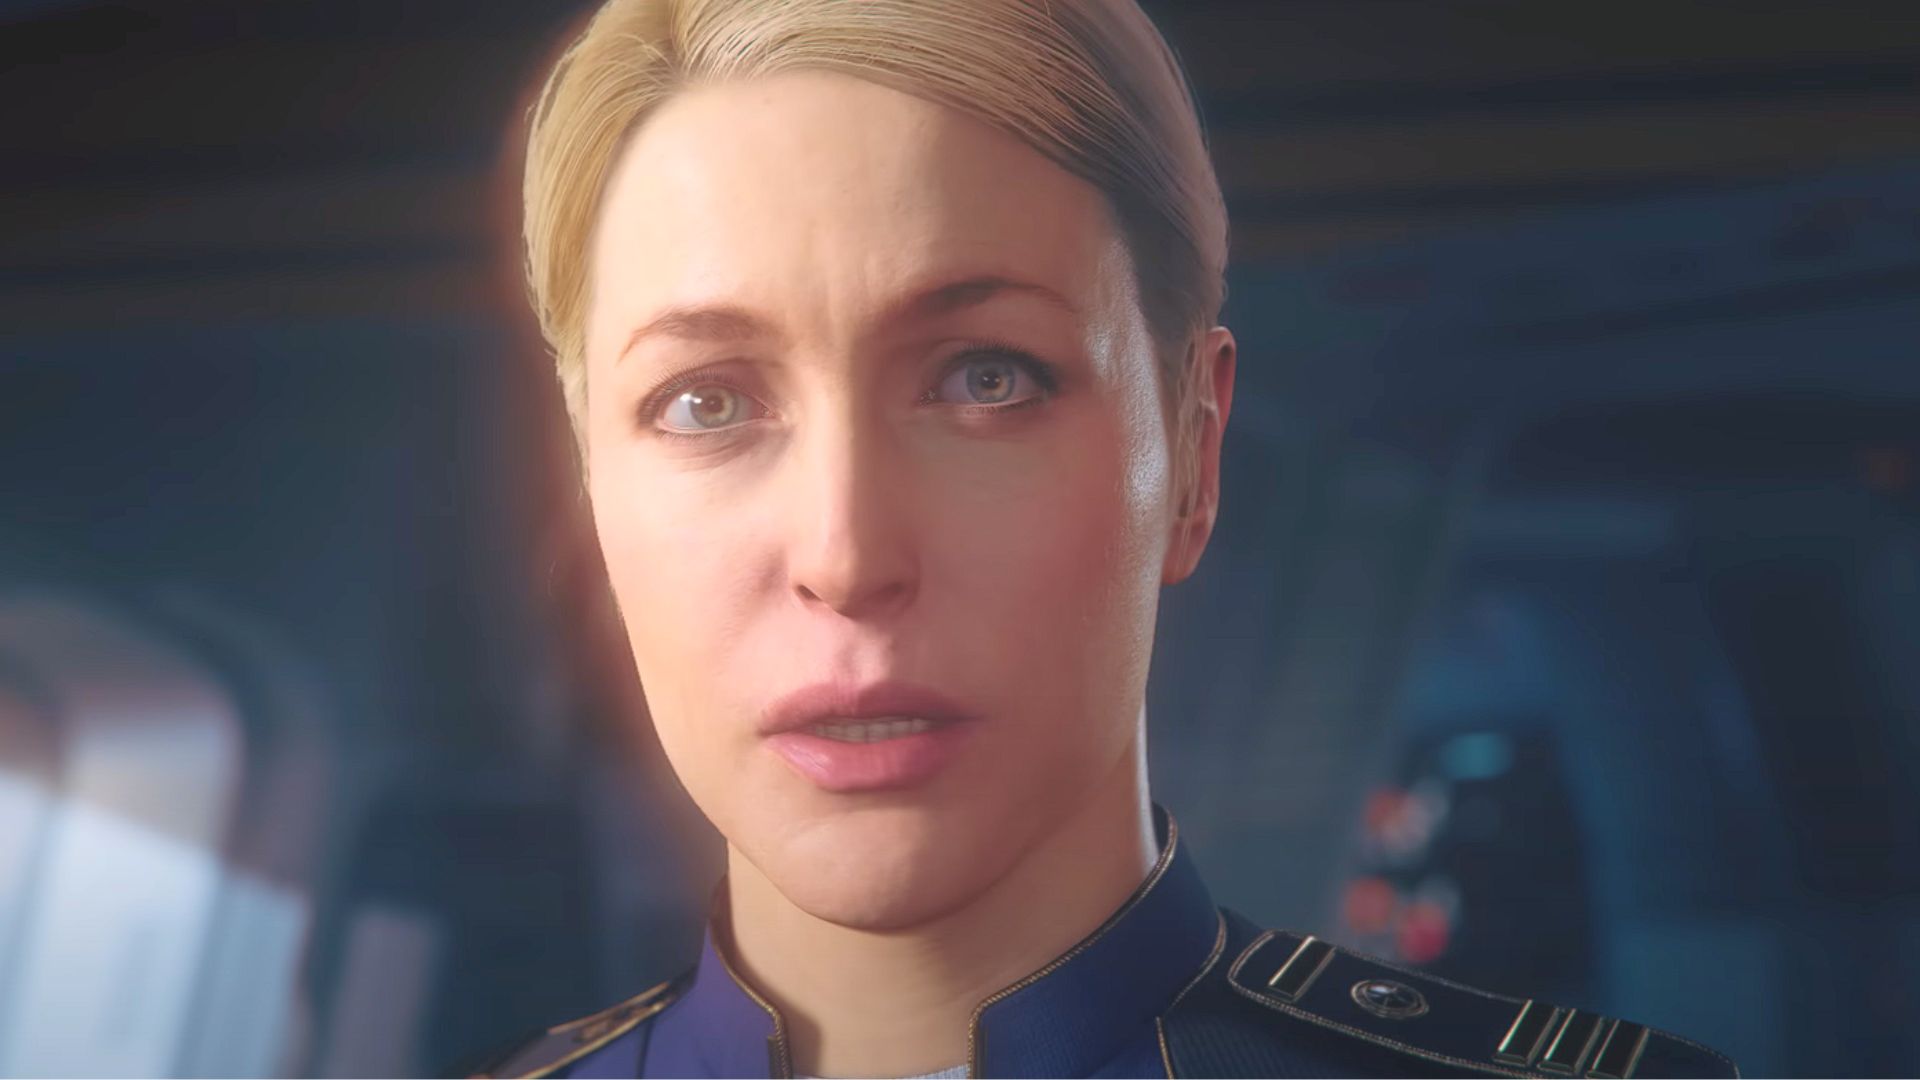 Star Citizen is a free game right now, but you'll have to be quick